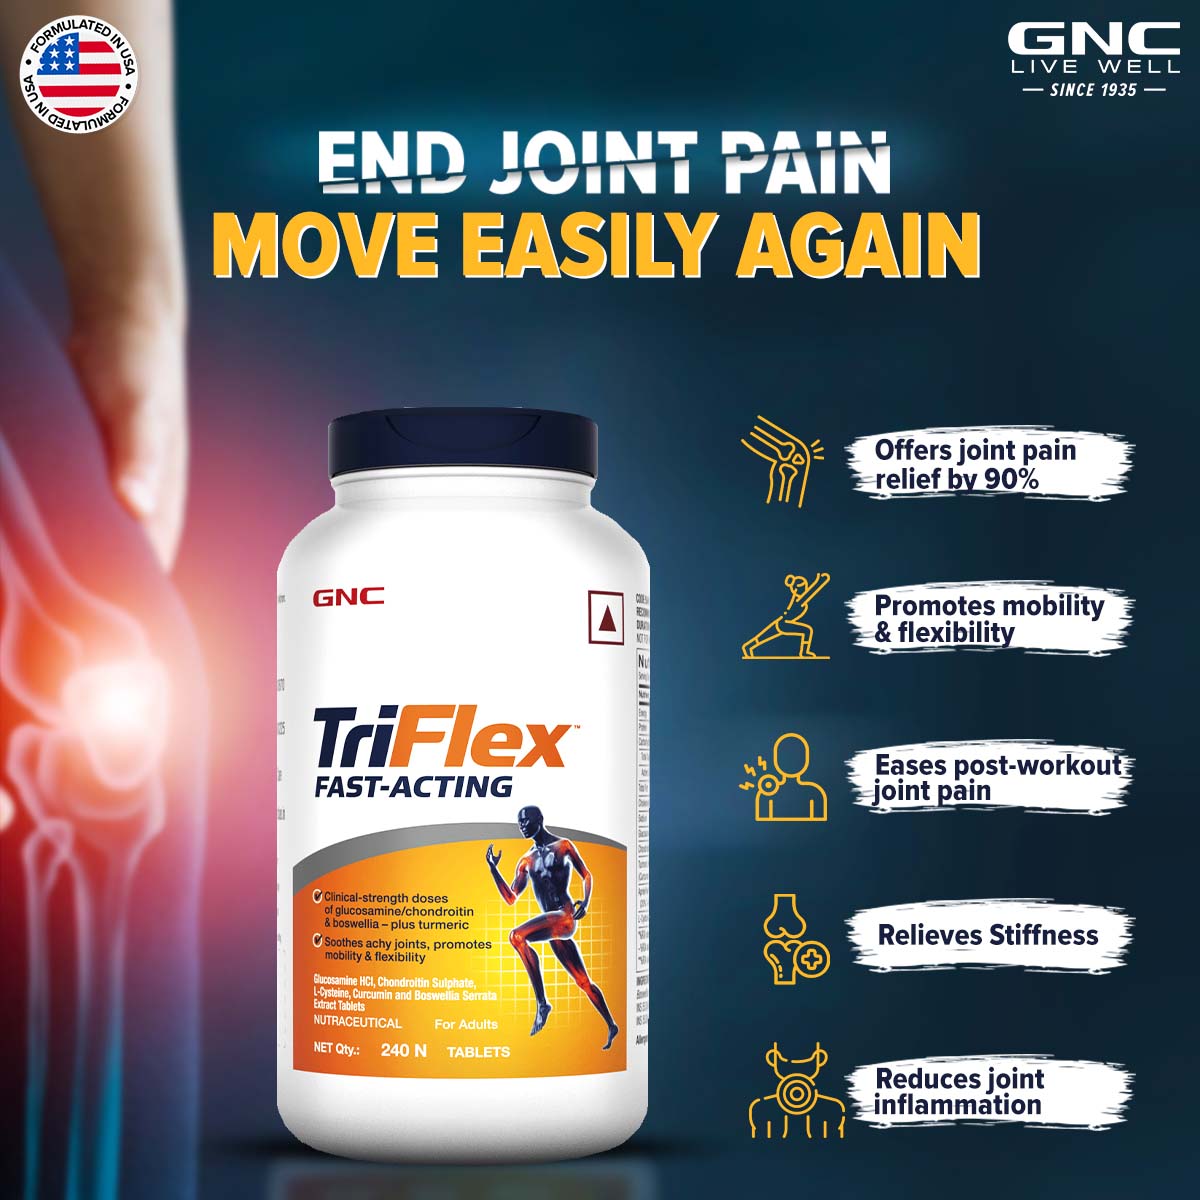 GNC TriFlex Fast-Acting - Relieves Pain & Stiffness for Knees, Wrist & Other Joints Within 5 Days